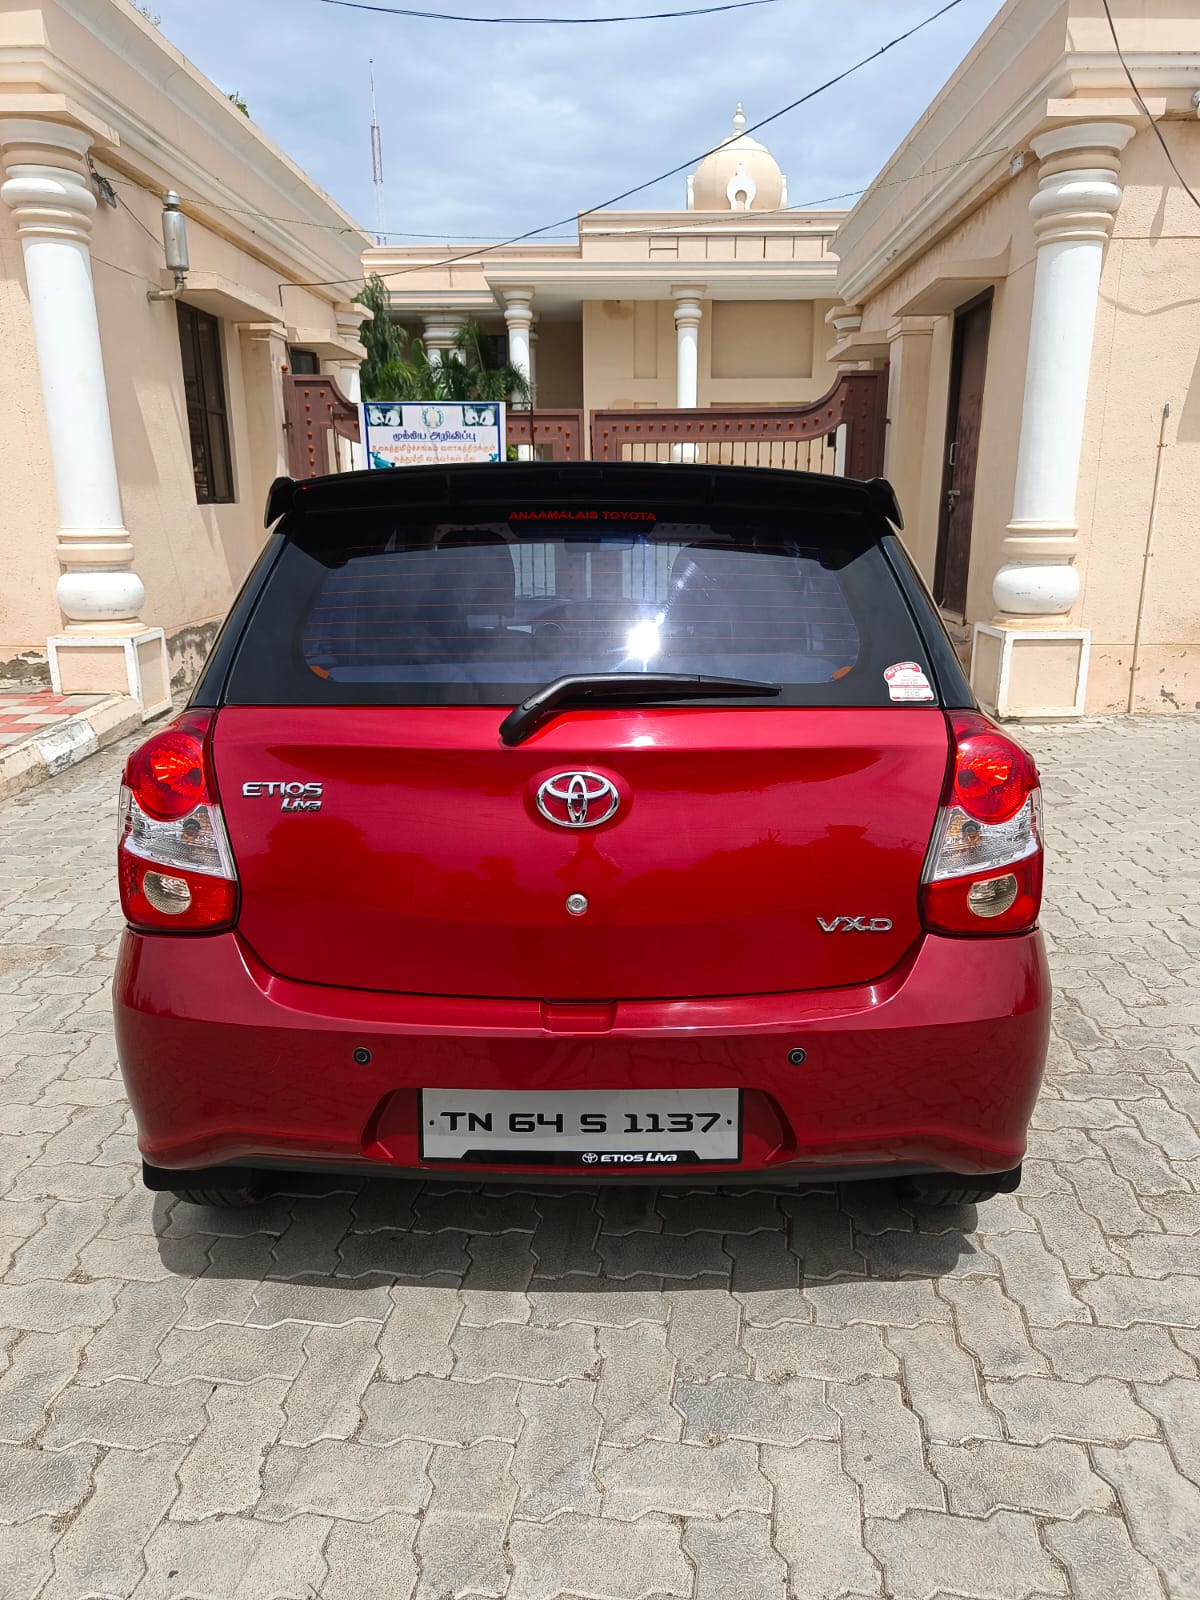 3751-for-sale-Toyota-Etios-Liva-Diesel-First-Owner-2018-TN-registered-rs-650000